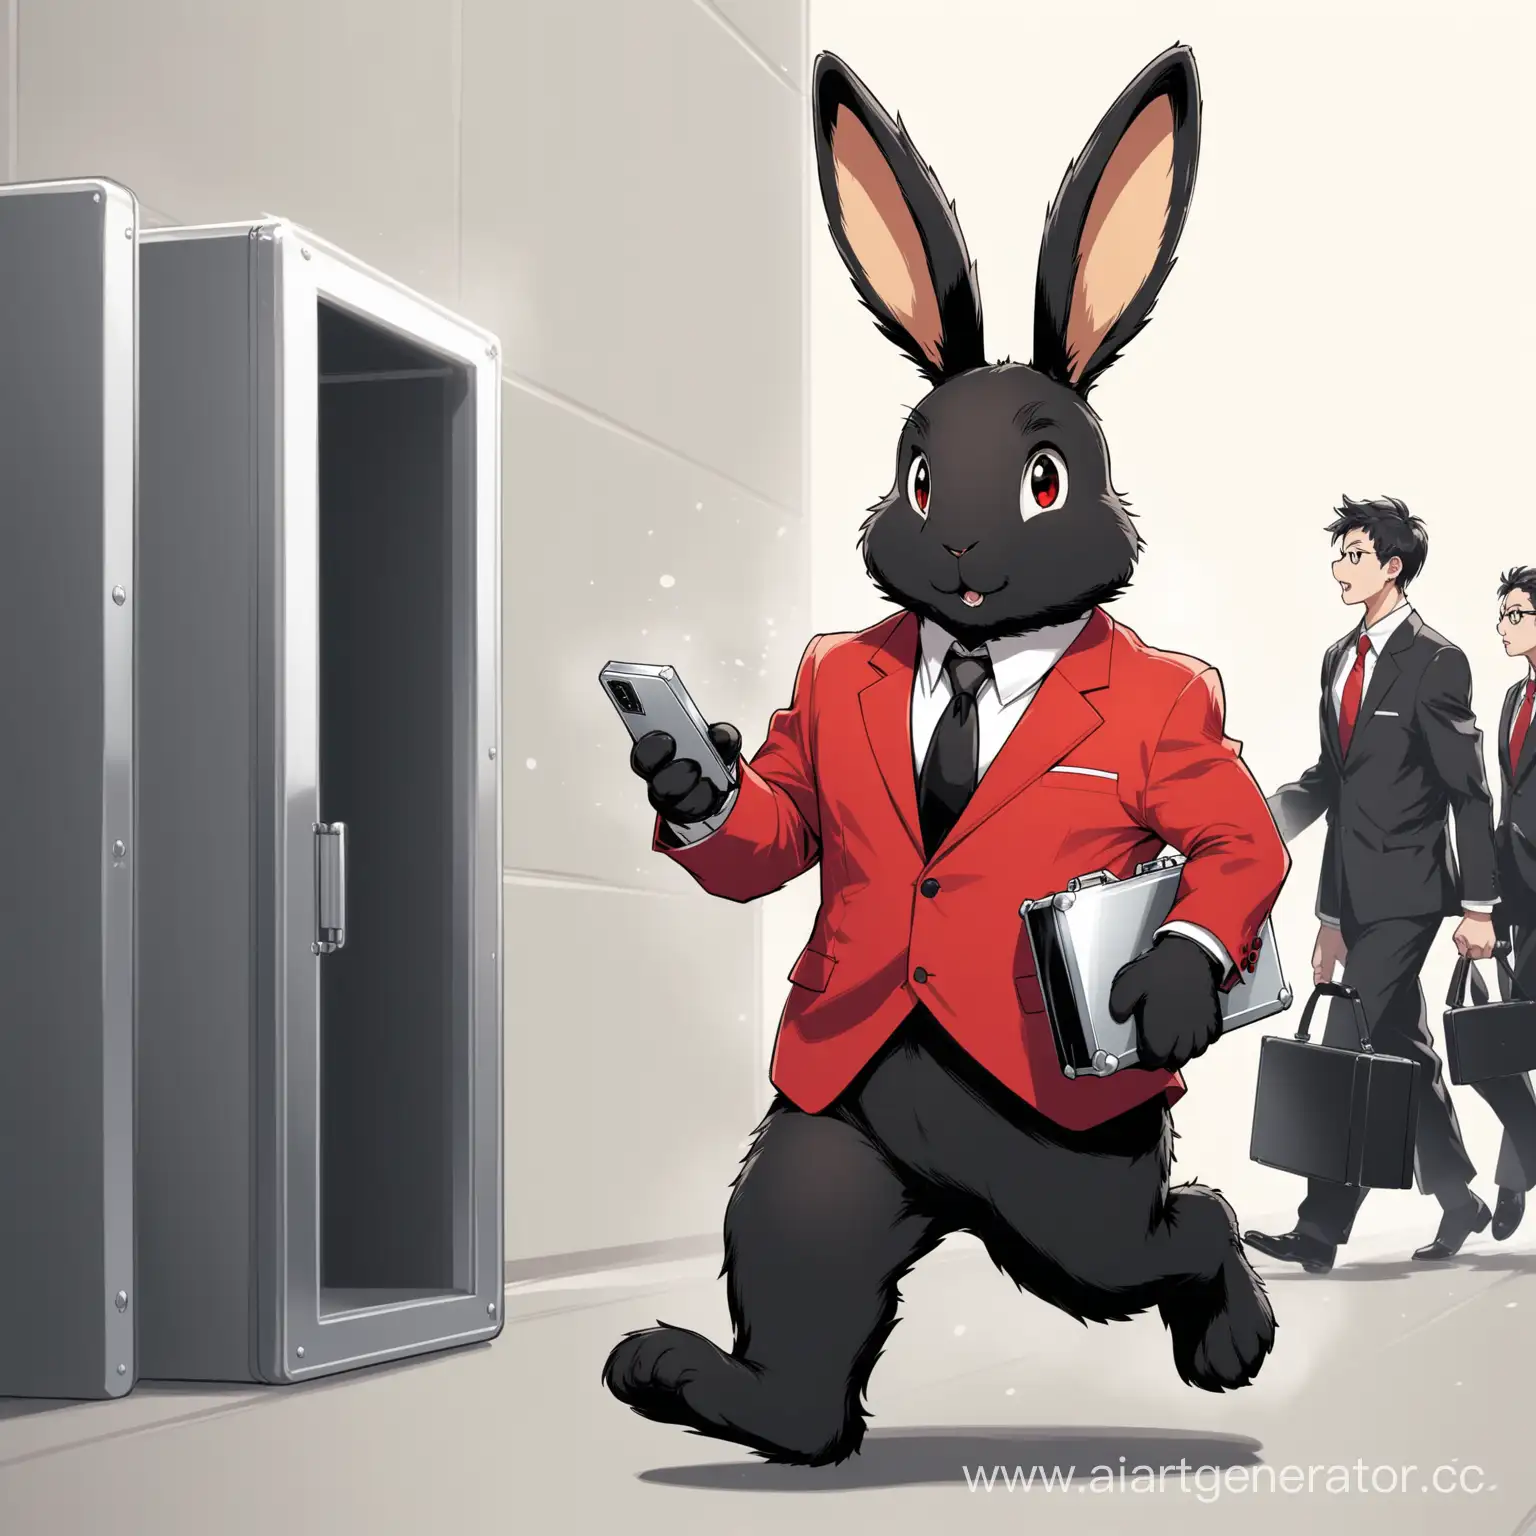 Rabbit-in-Business-Attire-Hurrying-to-Job-Interview-with-Phone-and-Briefcase